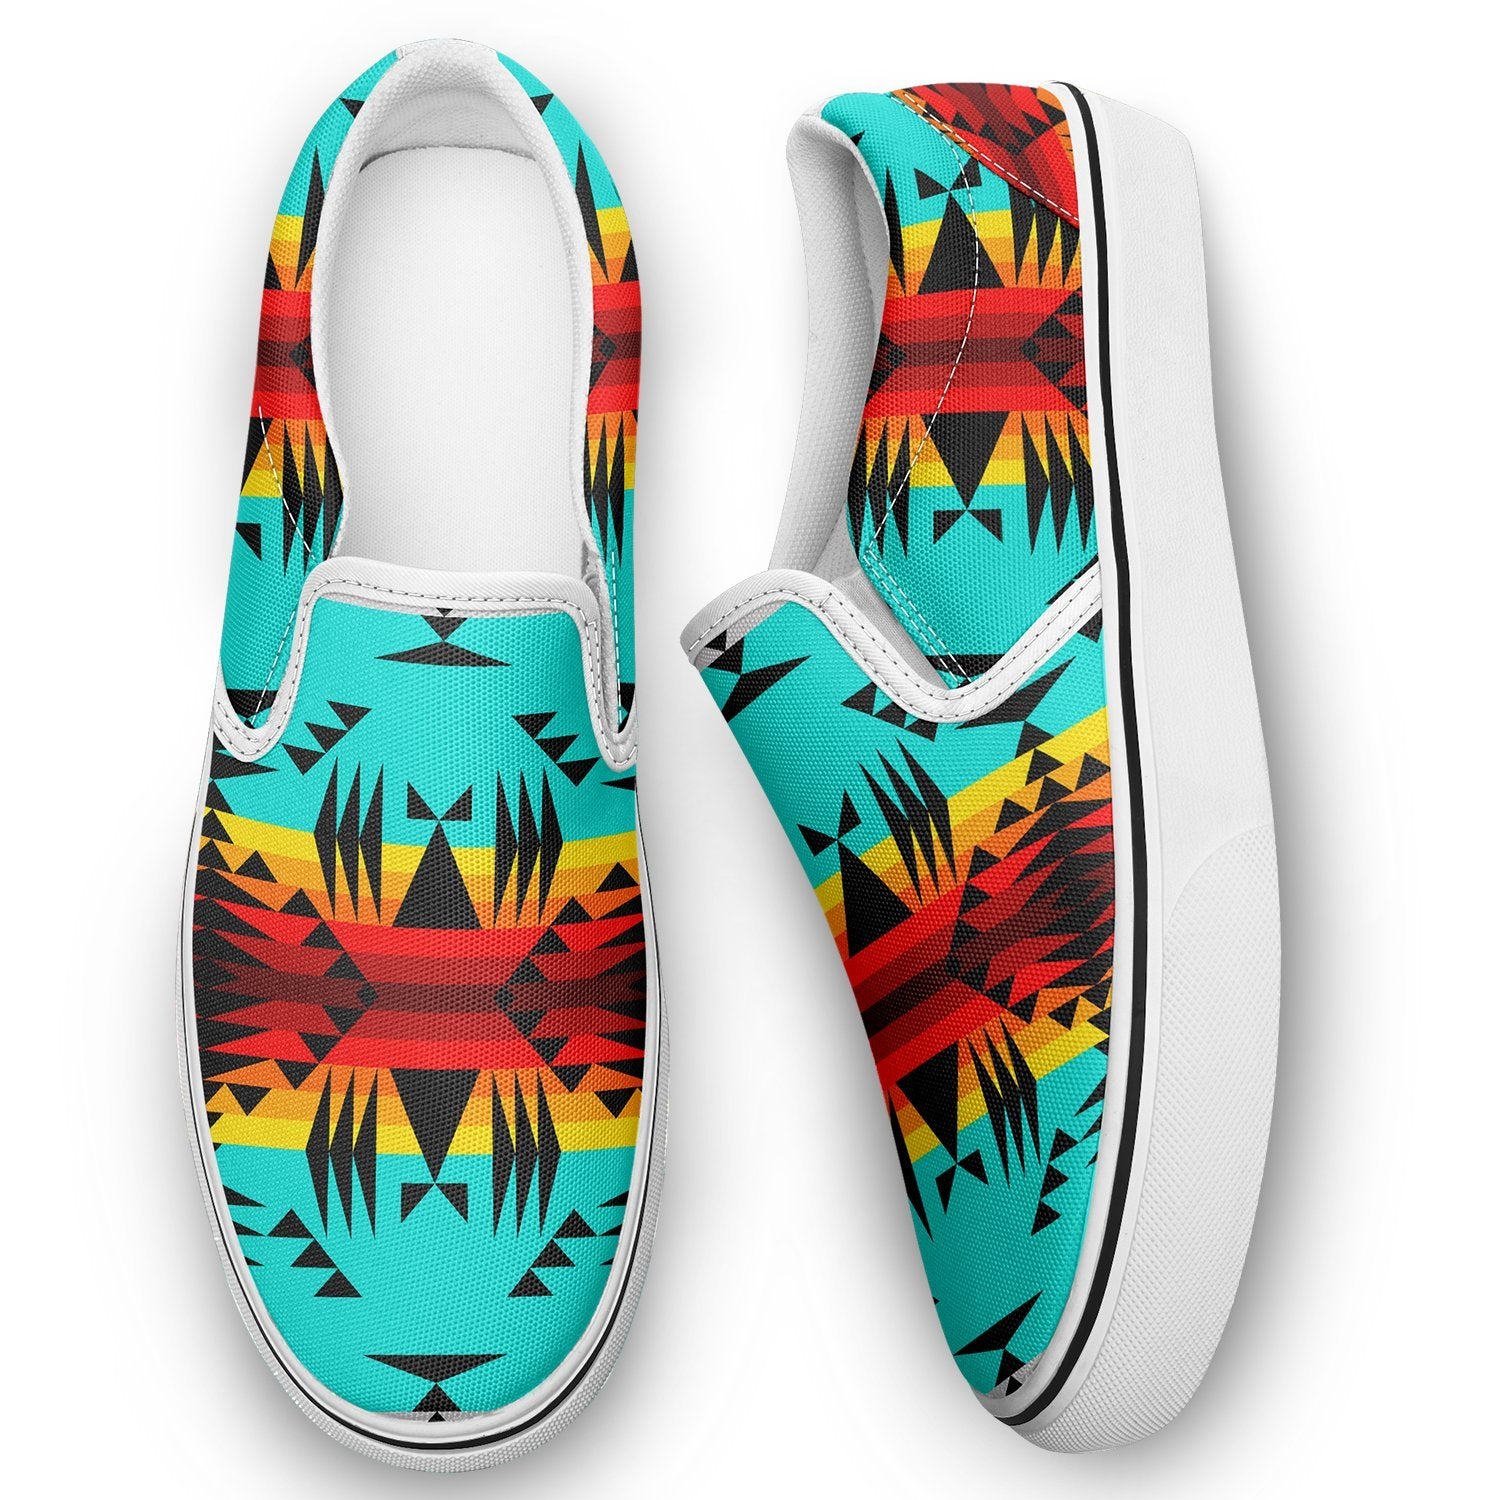 Between the Mountains Otoyimm Canvas Slip On Shoes 49 Dzine 